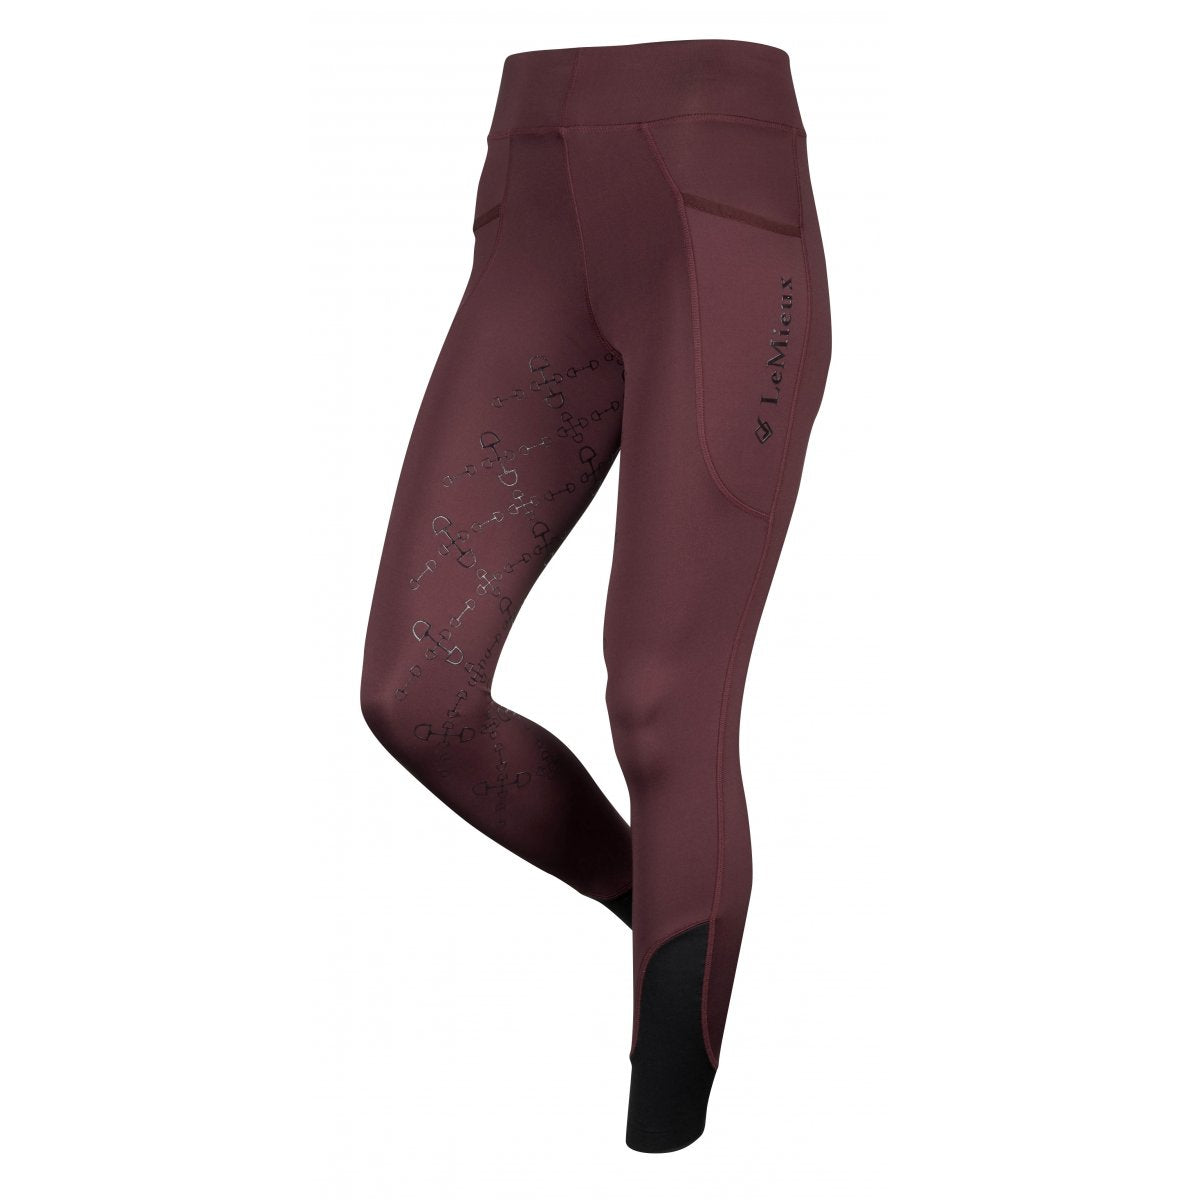 Woman's maroon horse riding tights with pattern and branding displayed.